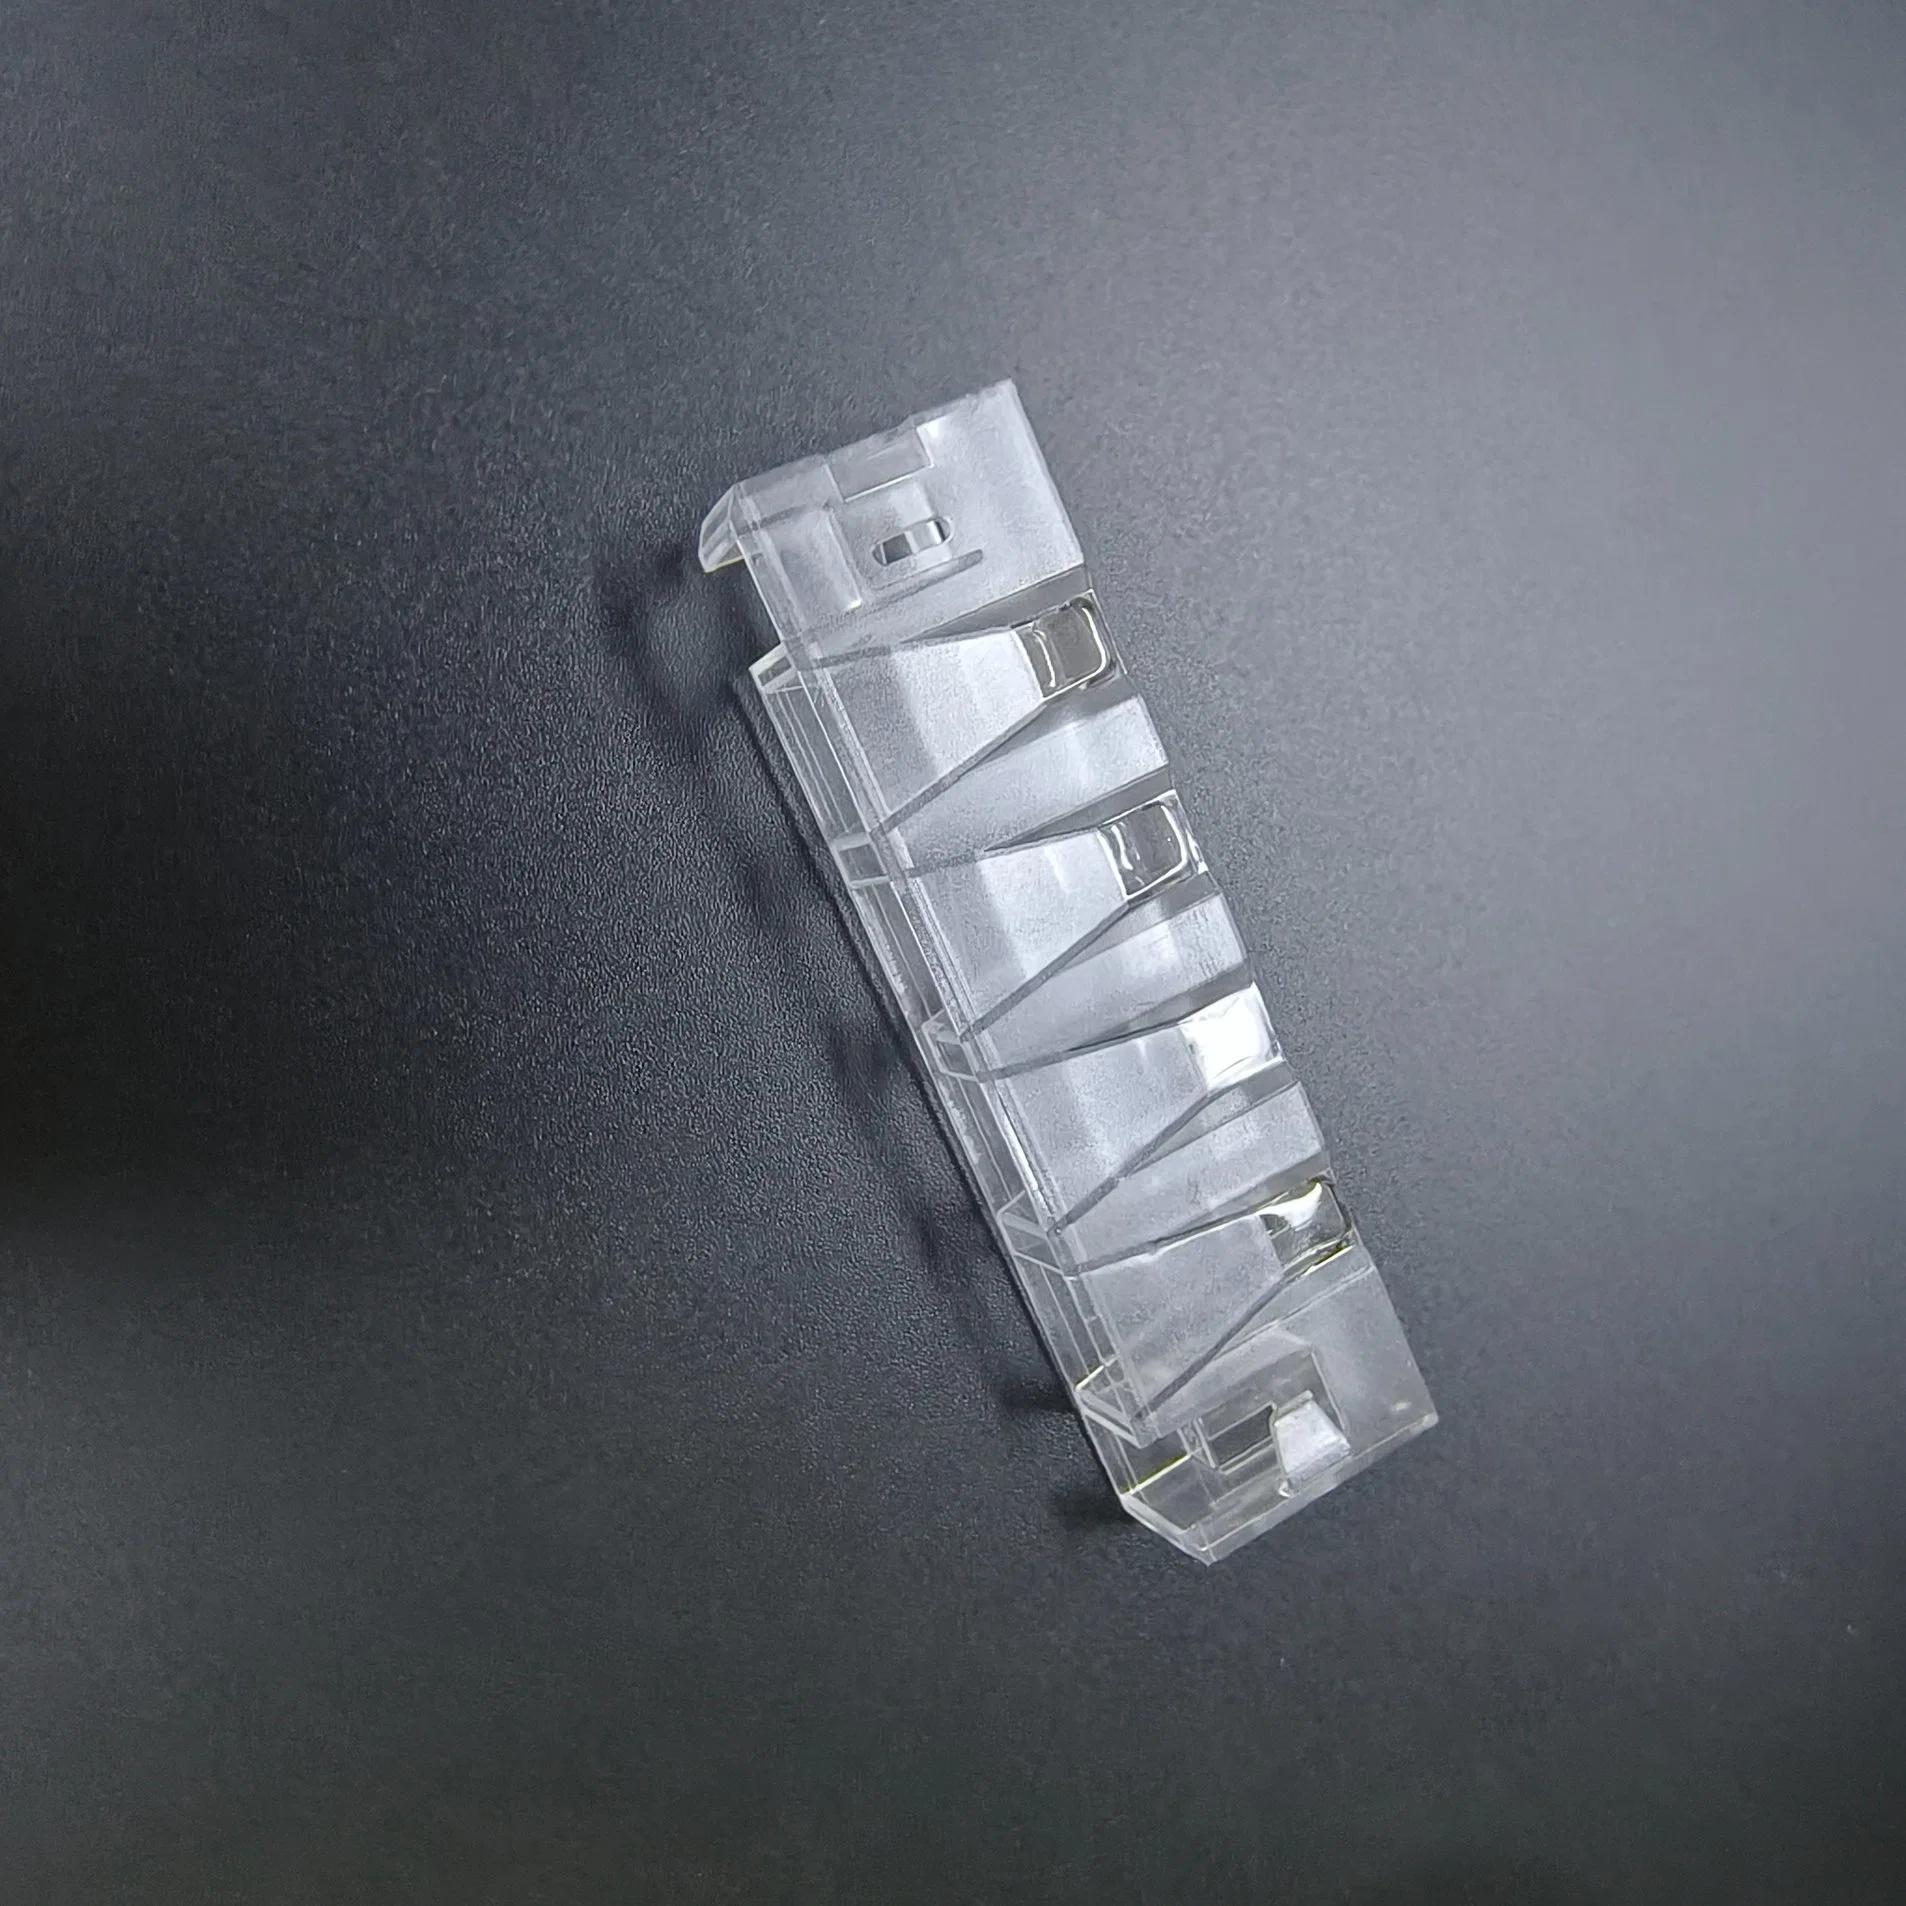 Werfen Acl Top Cuvette Coagulation Cup for Efficient Blood Testing